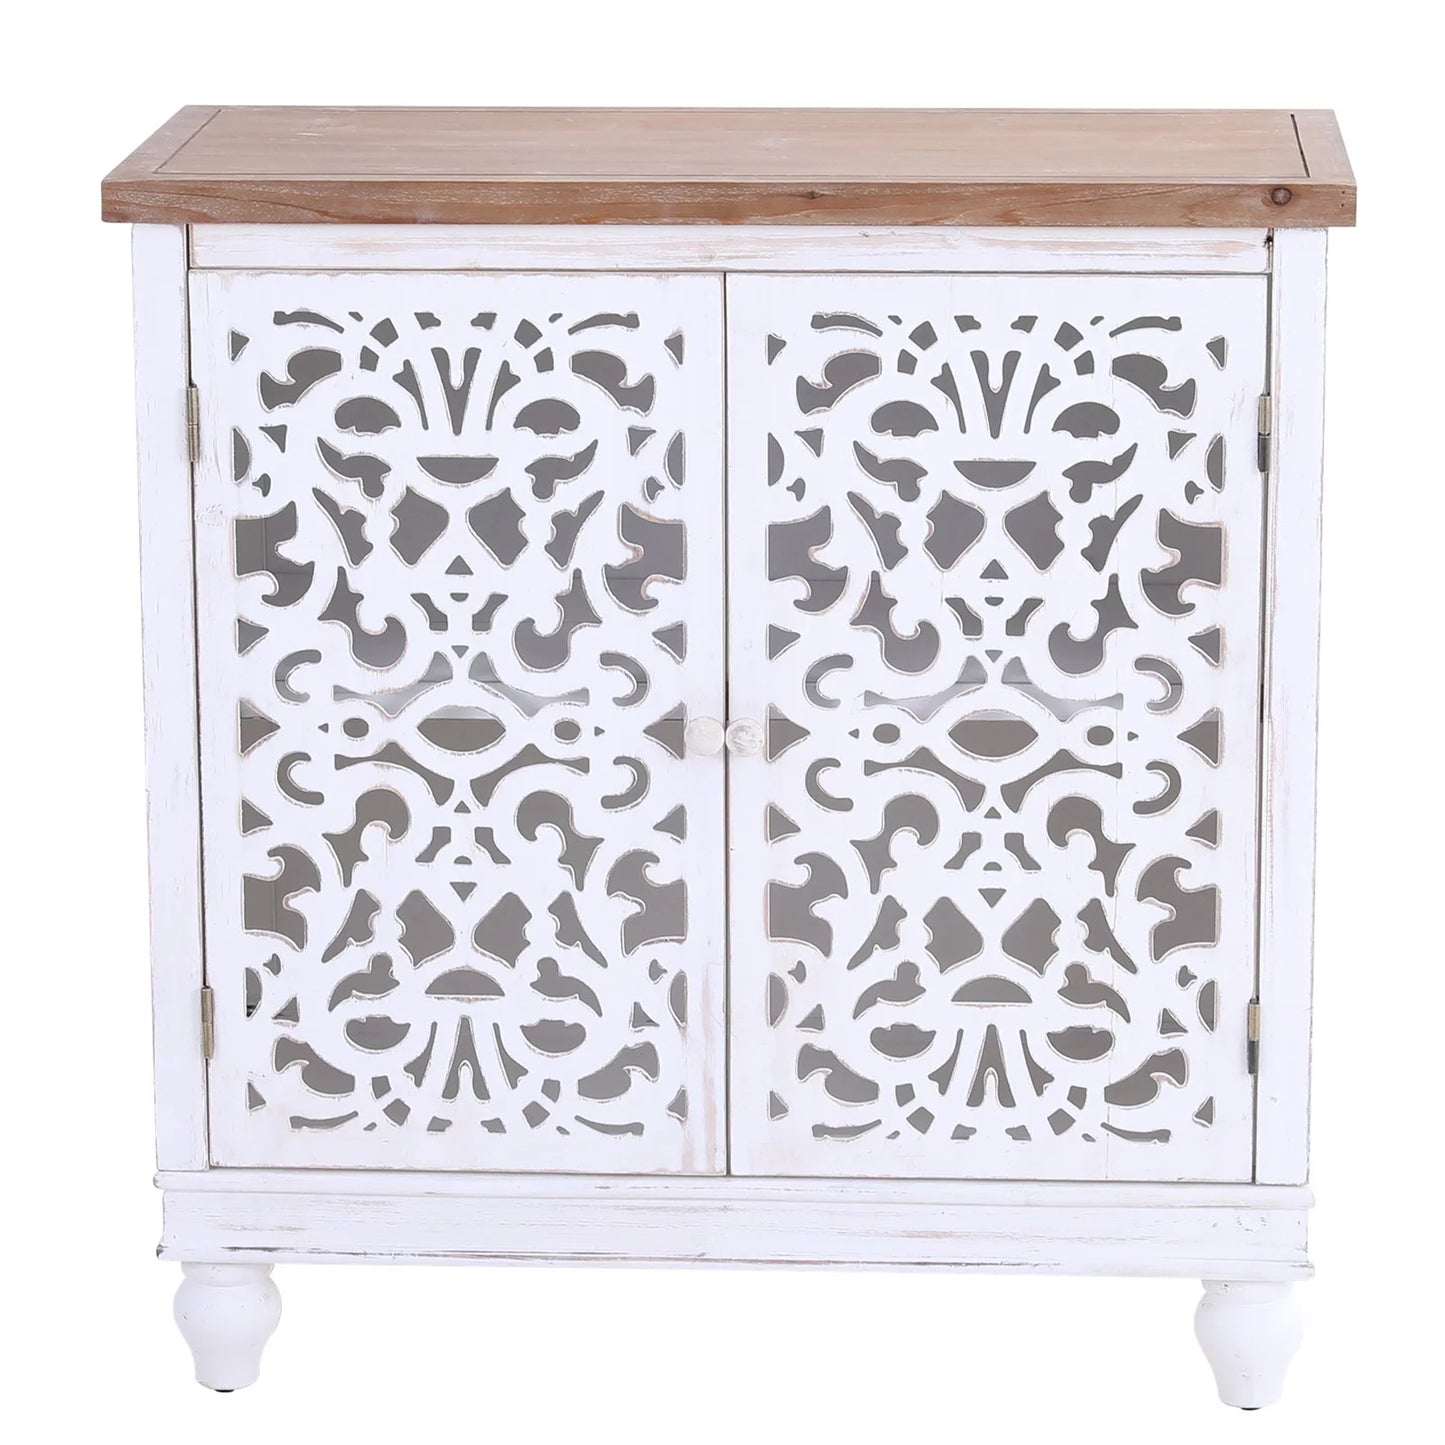 Sophia & William 33" Distressed Accent Storage Cabinet with Hollow-Carved Doors, White